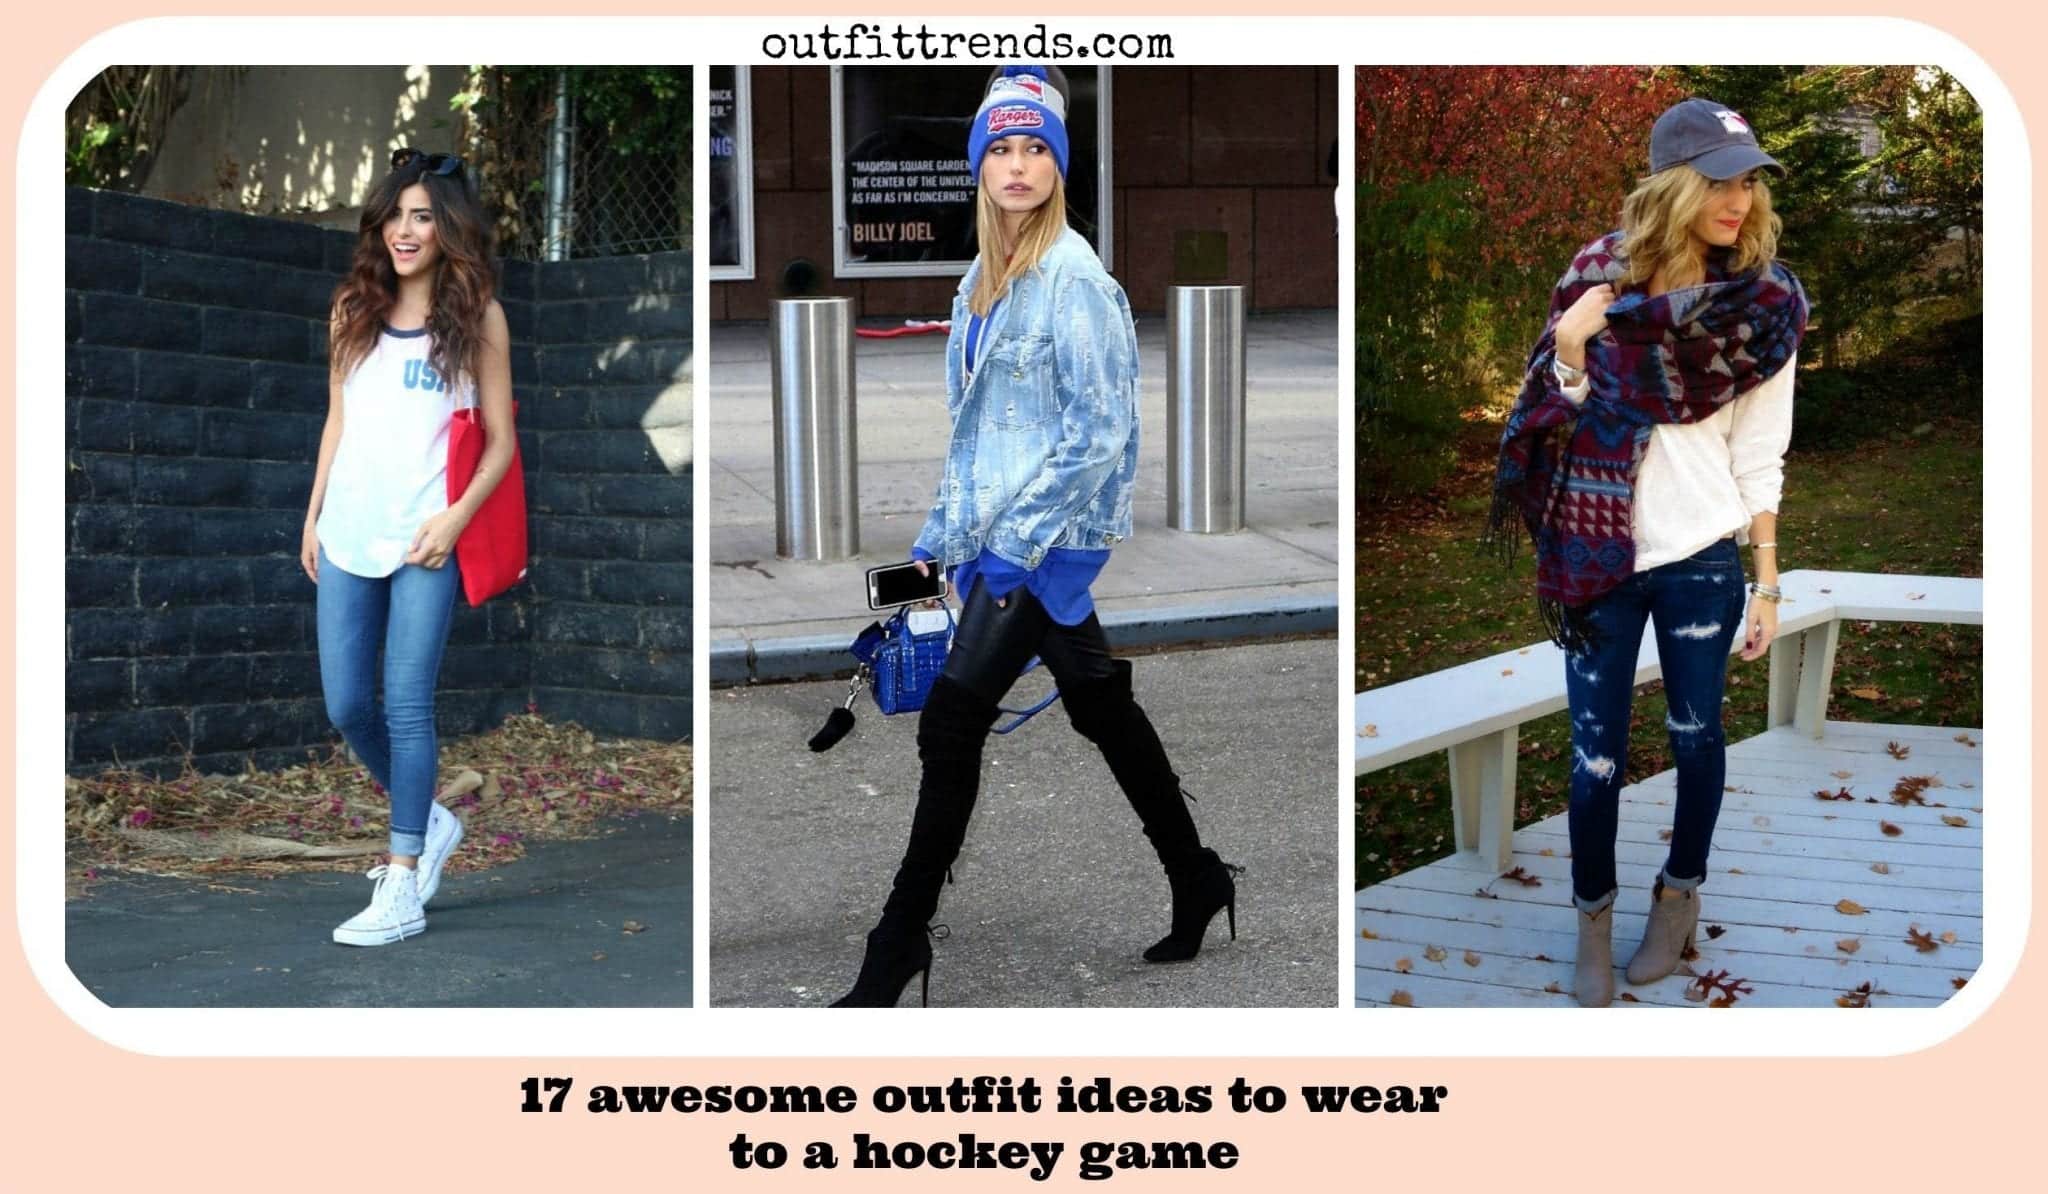 18 Hockey Game Outfits: What to Wear to a Hockey Game?